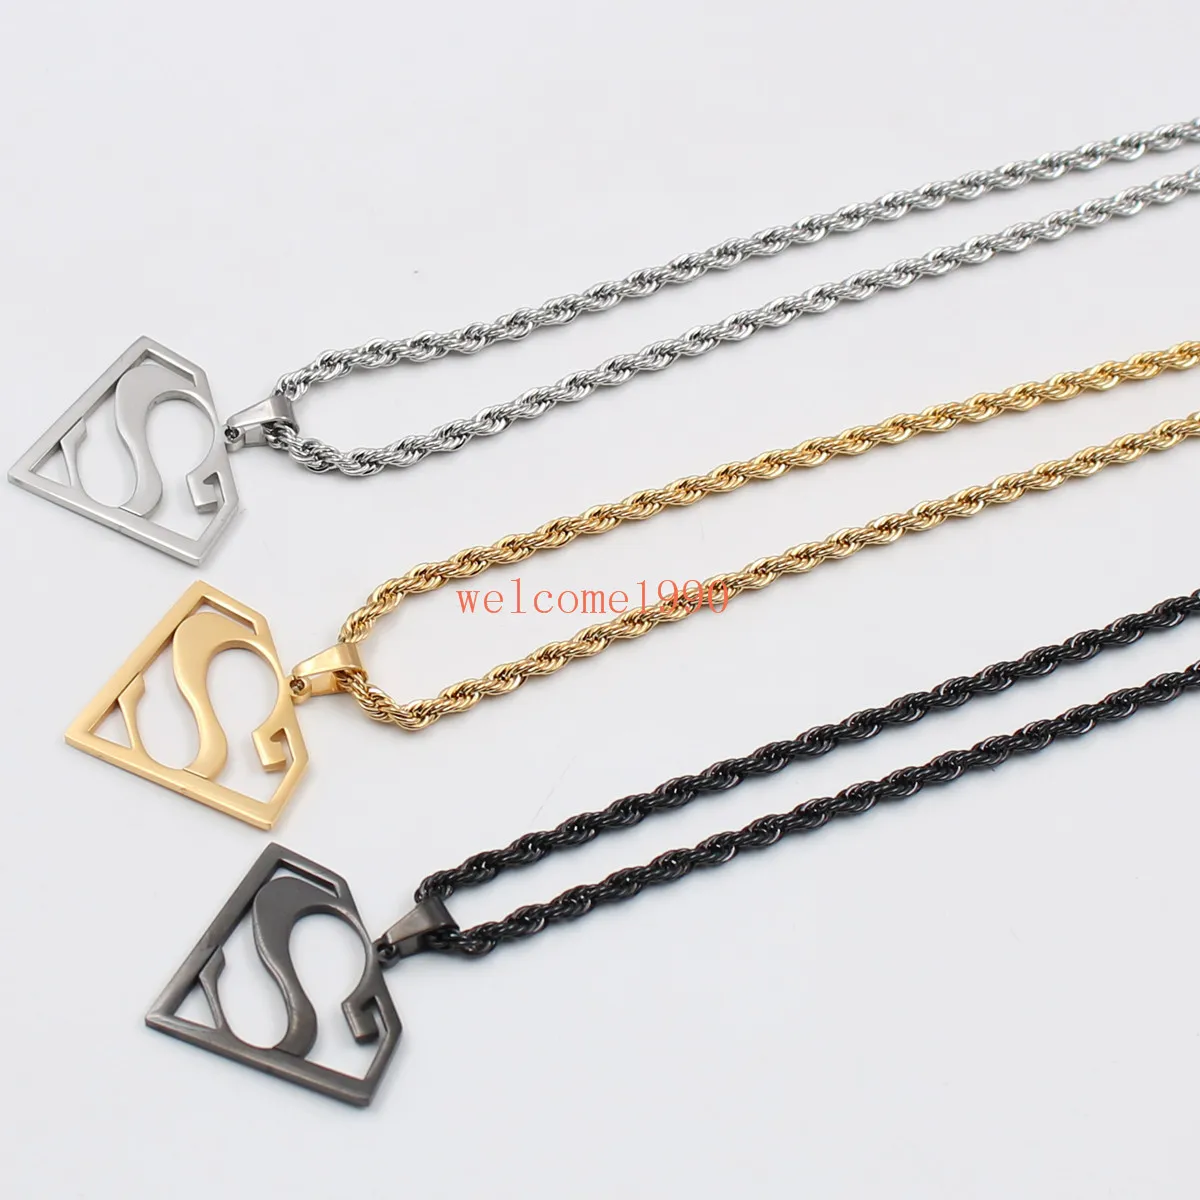 choose Gold silver black Stainless Steel 15 inch Superman logo Pendant Men039s Gifts Fashion Rope chain necklace 22 inch 4mm1271850